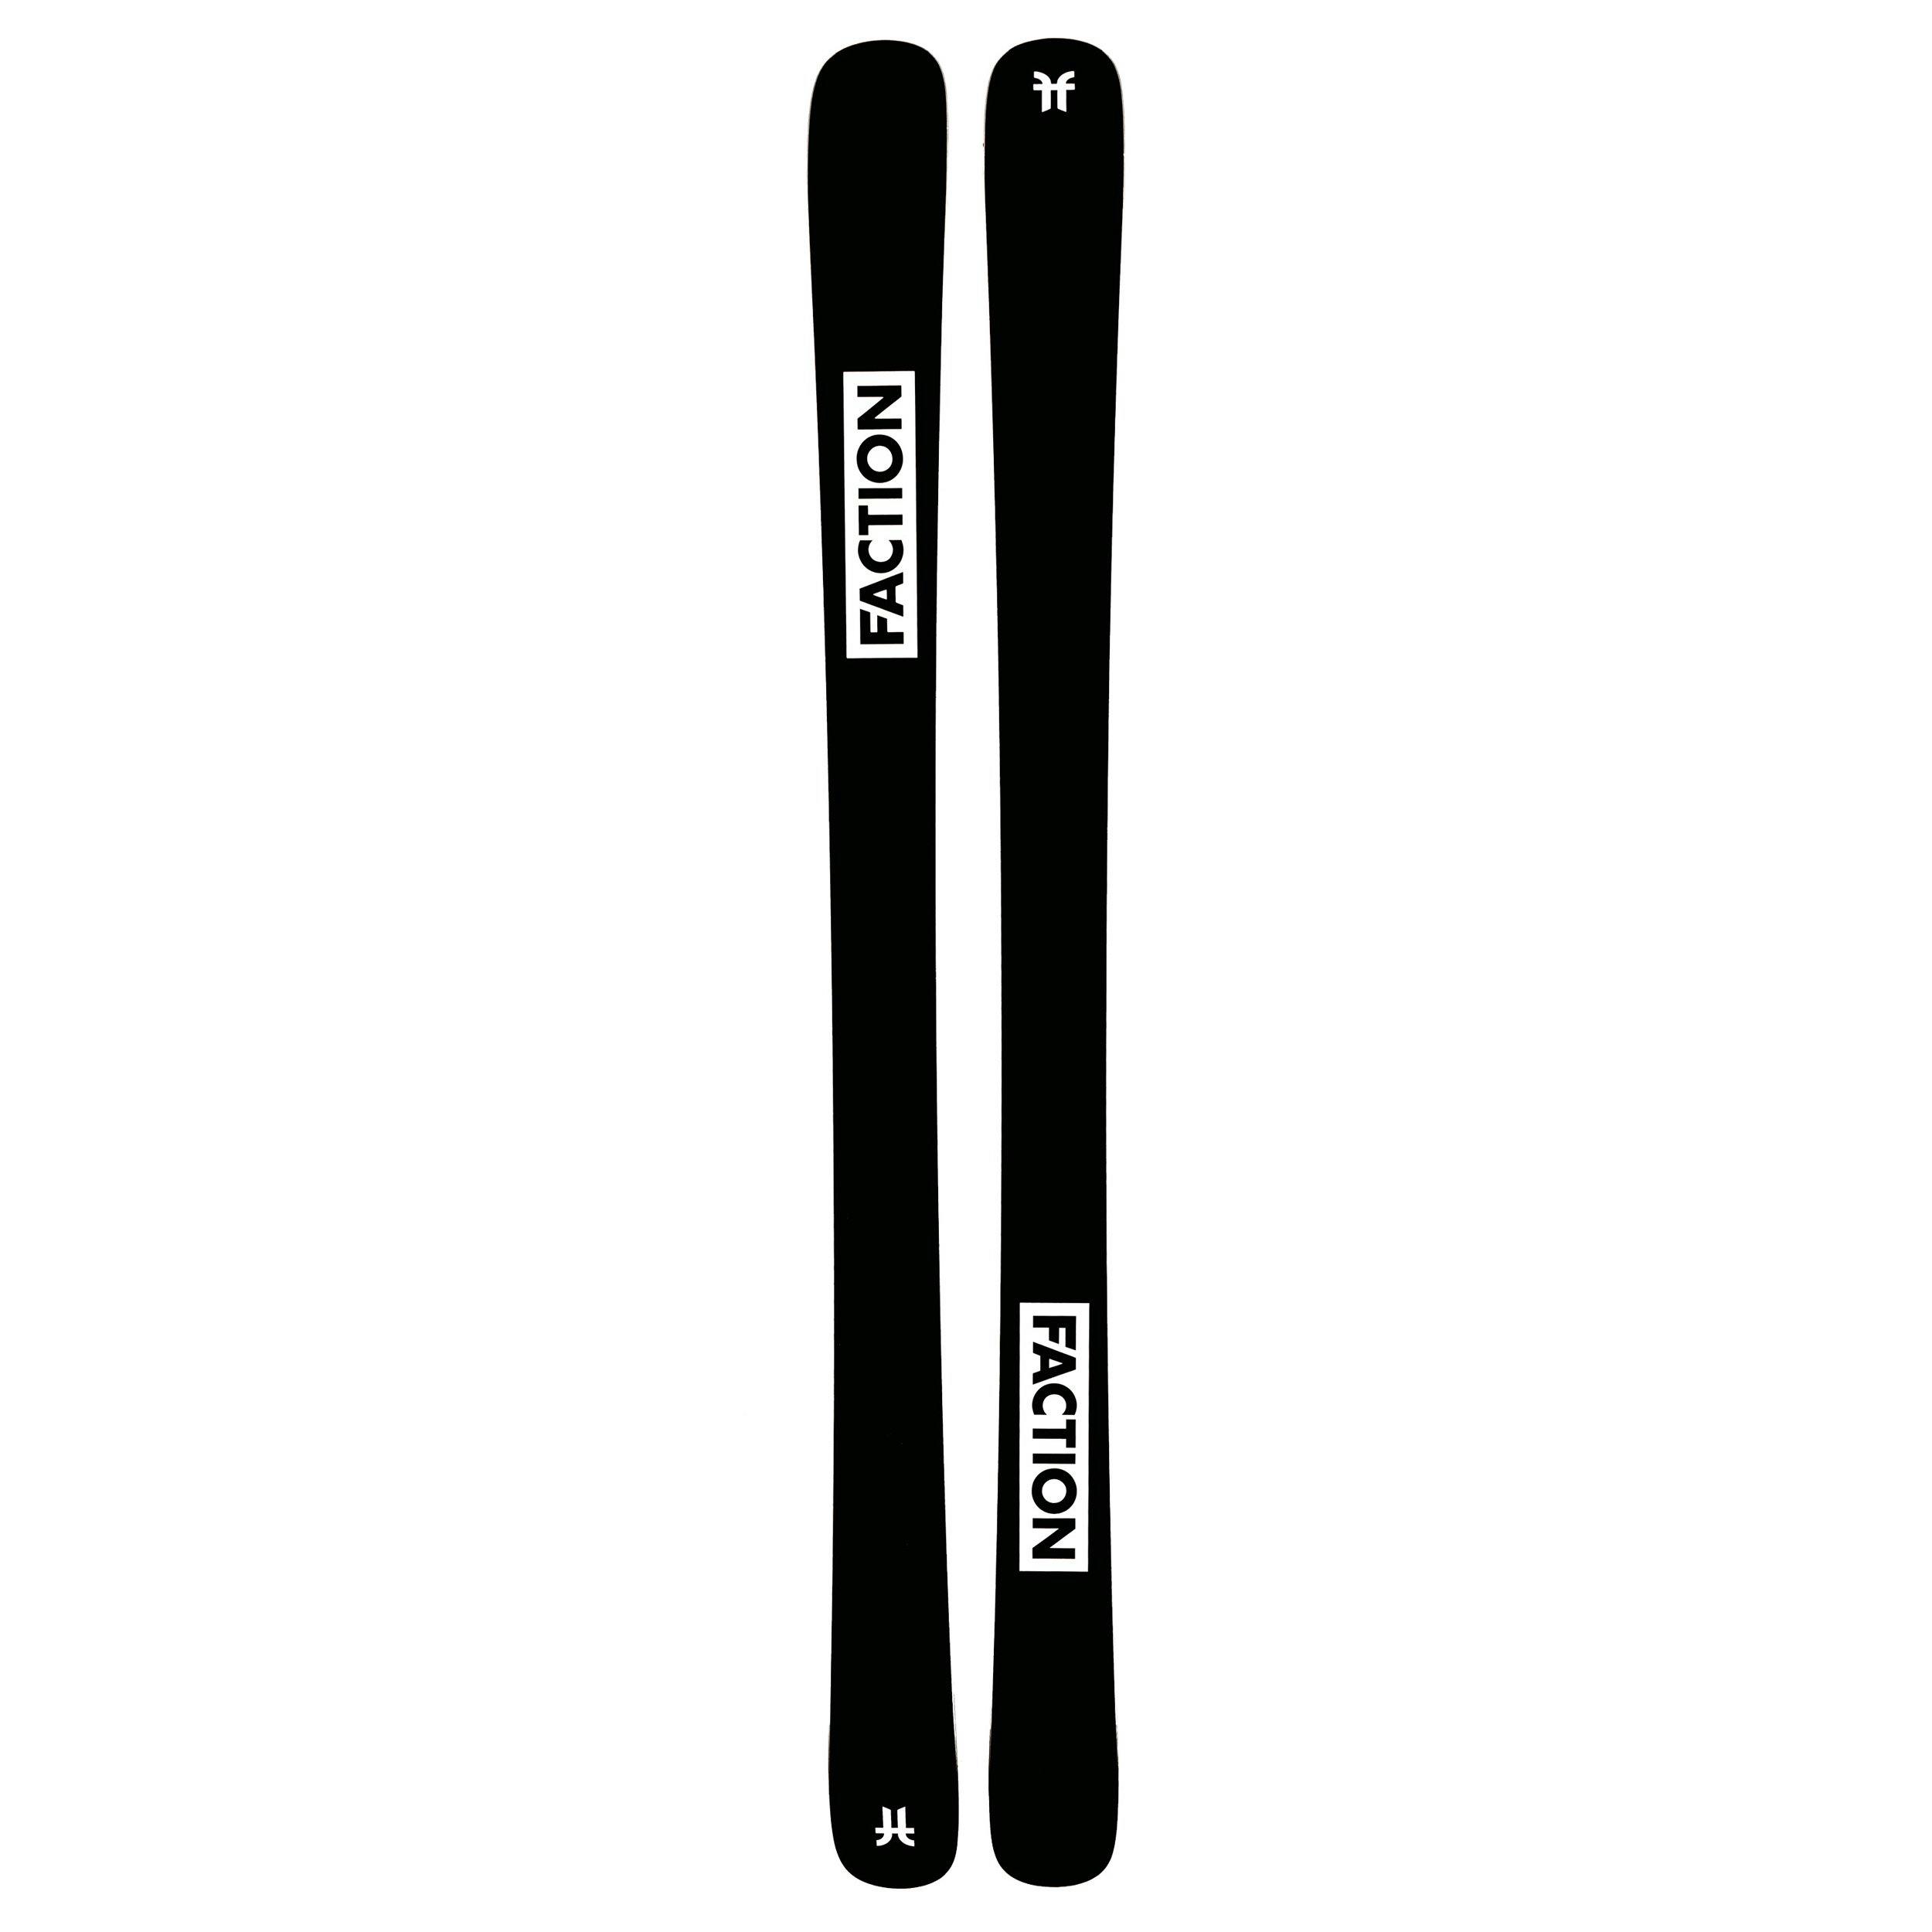 Faction Candide 2.0 Skis · 2021 · 166 cm